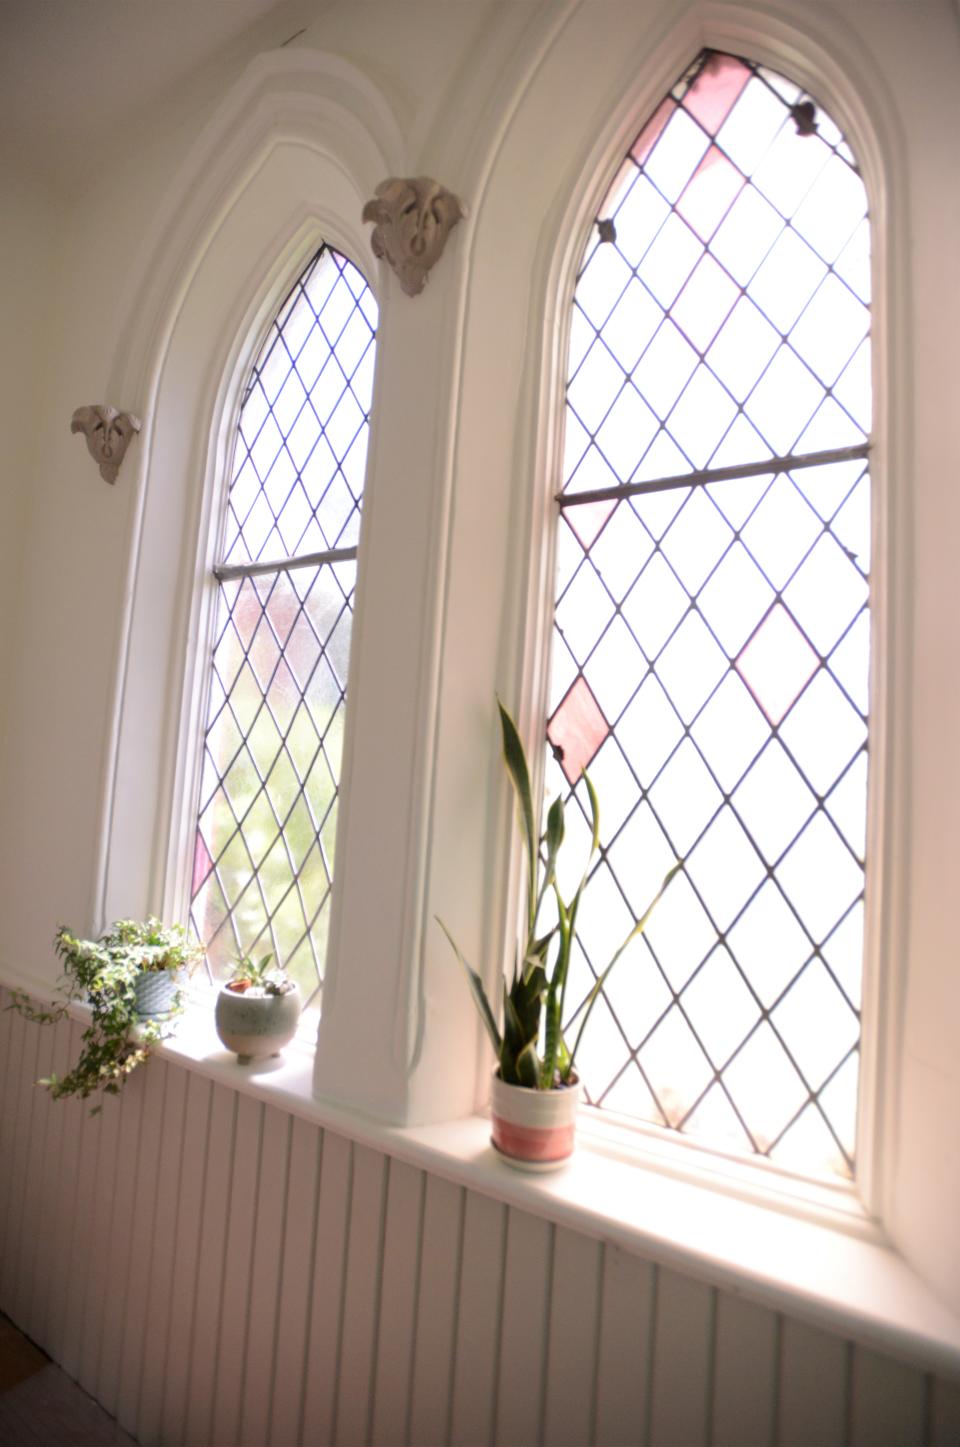 The stained glass windows fill the home with a pinkish light.